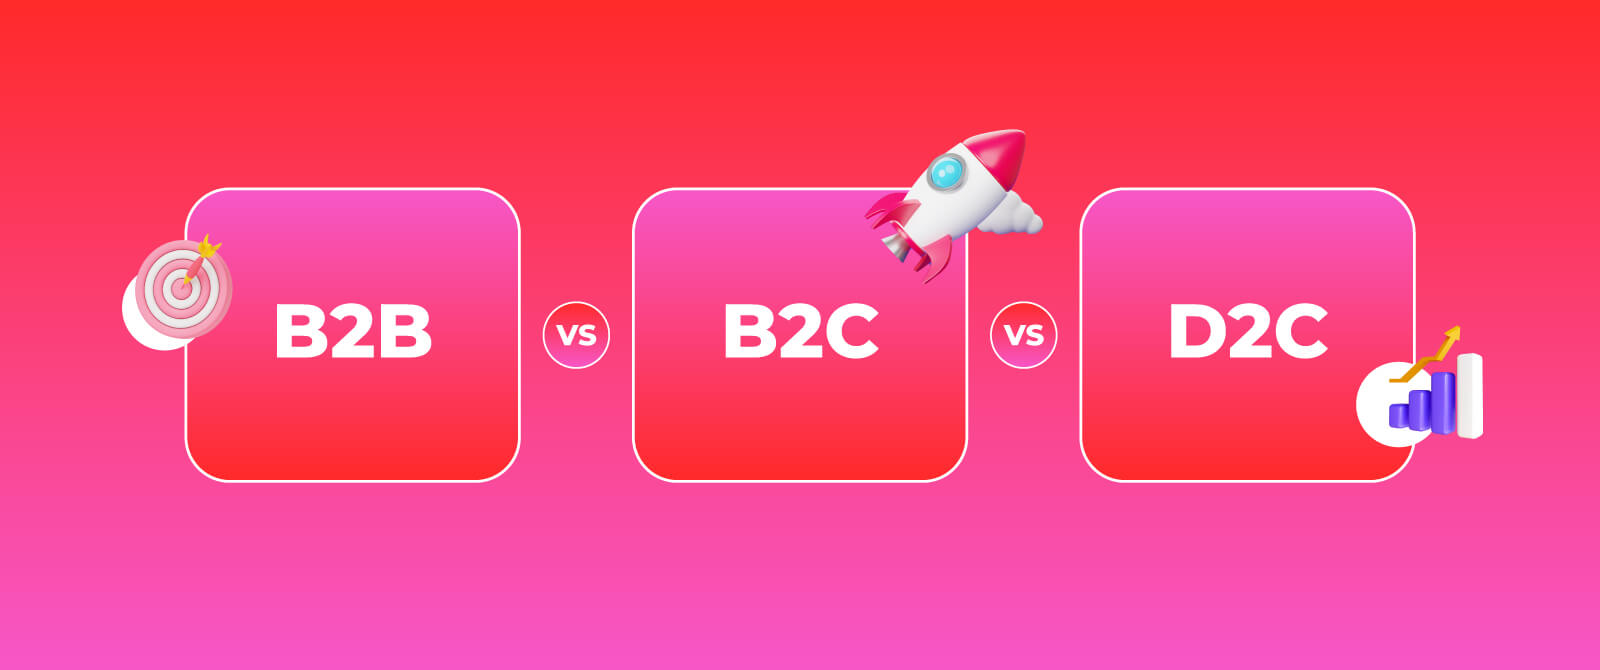 Difference Between B2B, B2C, and D2C Events?